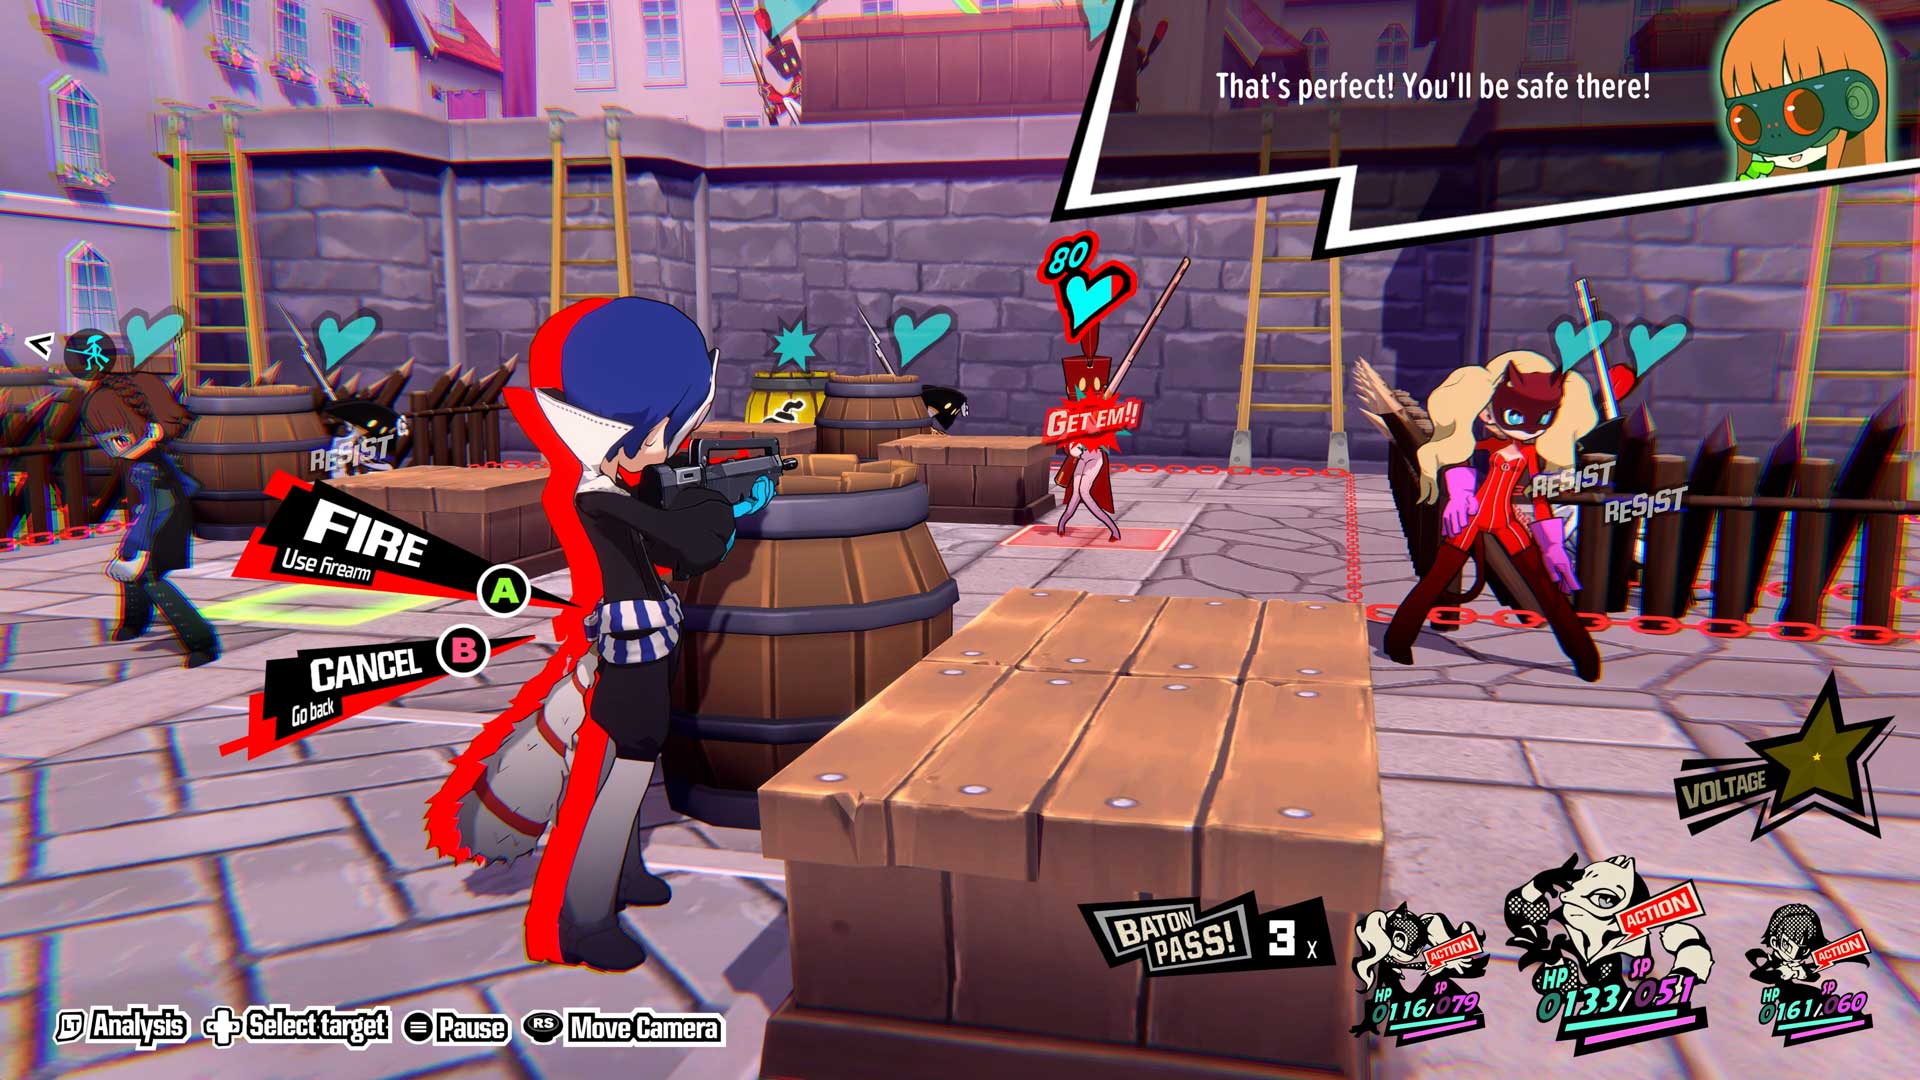 Persona 5 Tactica: All Platforms and their Pre-order Bonuses - Deltia's  Gaming